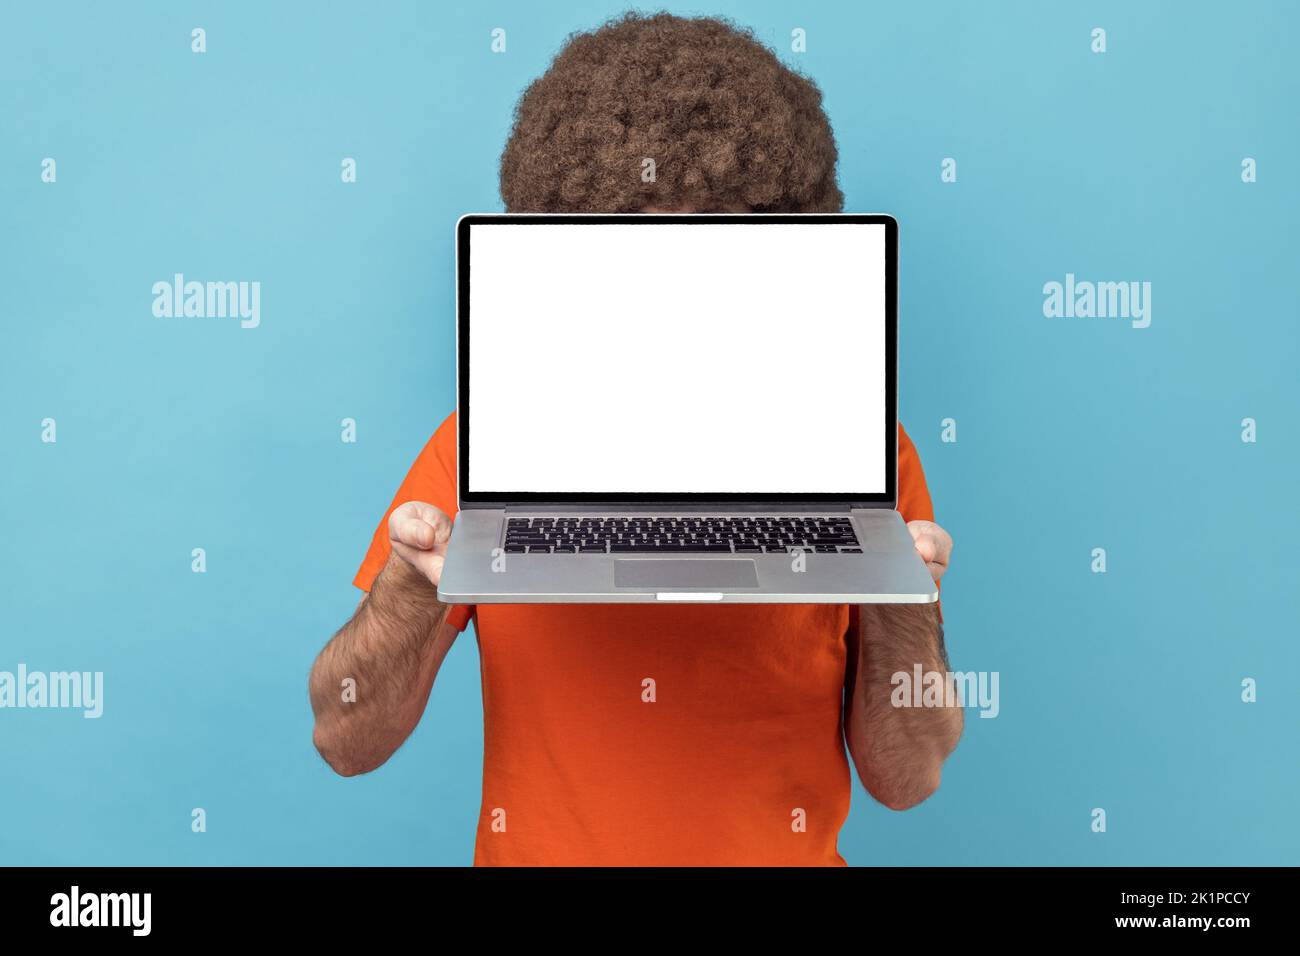 Unknown anonymous man with Afro hairstyle wearing orange T-shirt hiding his face with laptop with white empty display, copy space for promotional text. Indoor studio shot isolated on blue background. Stock Photo